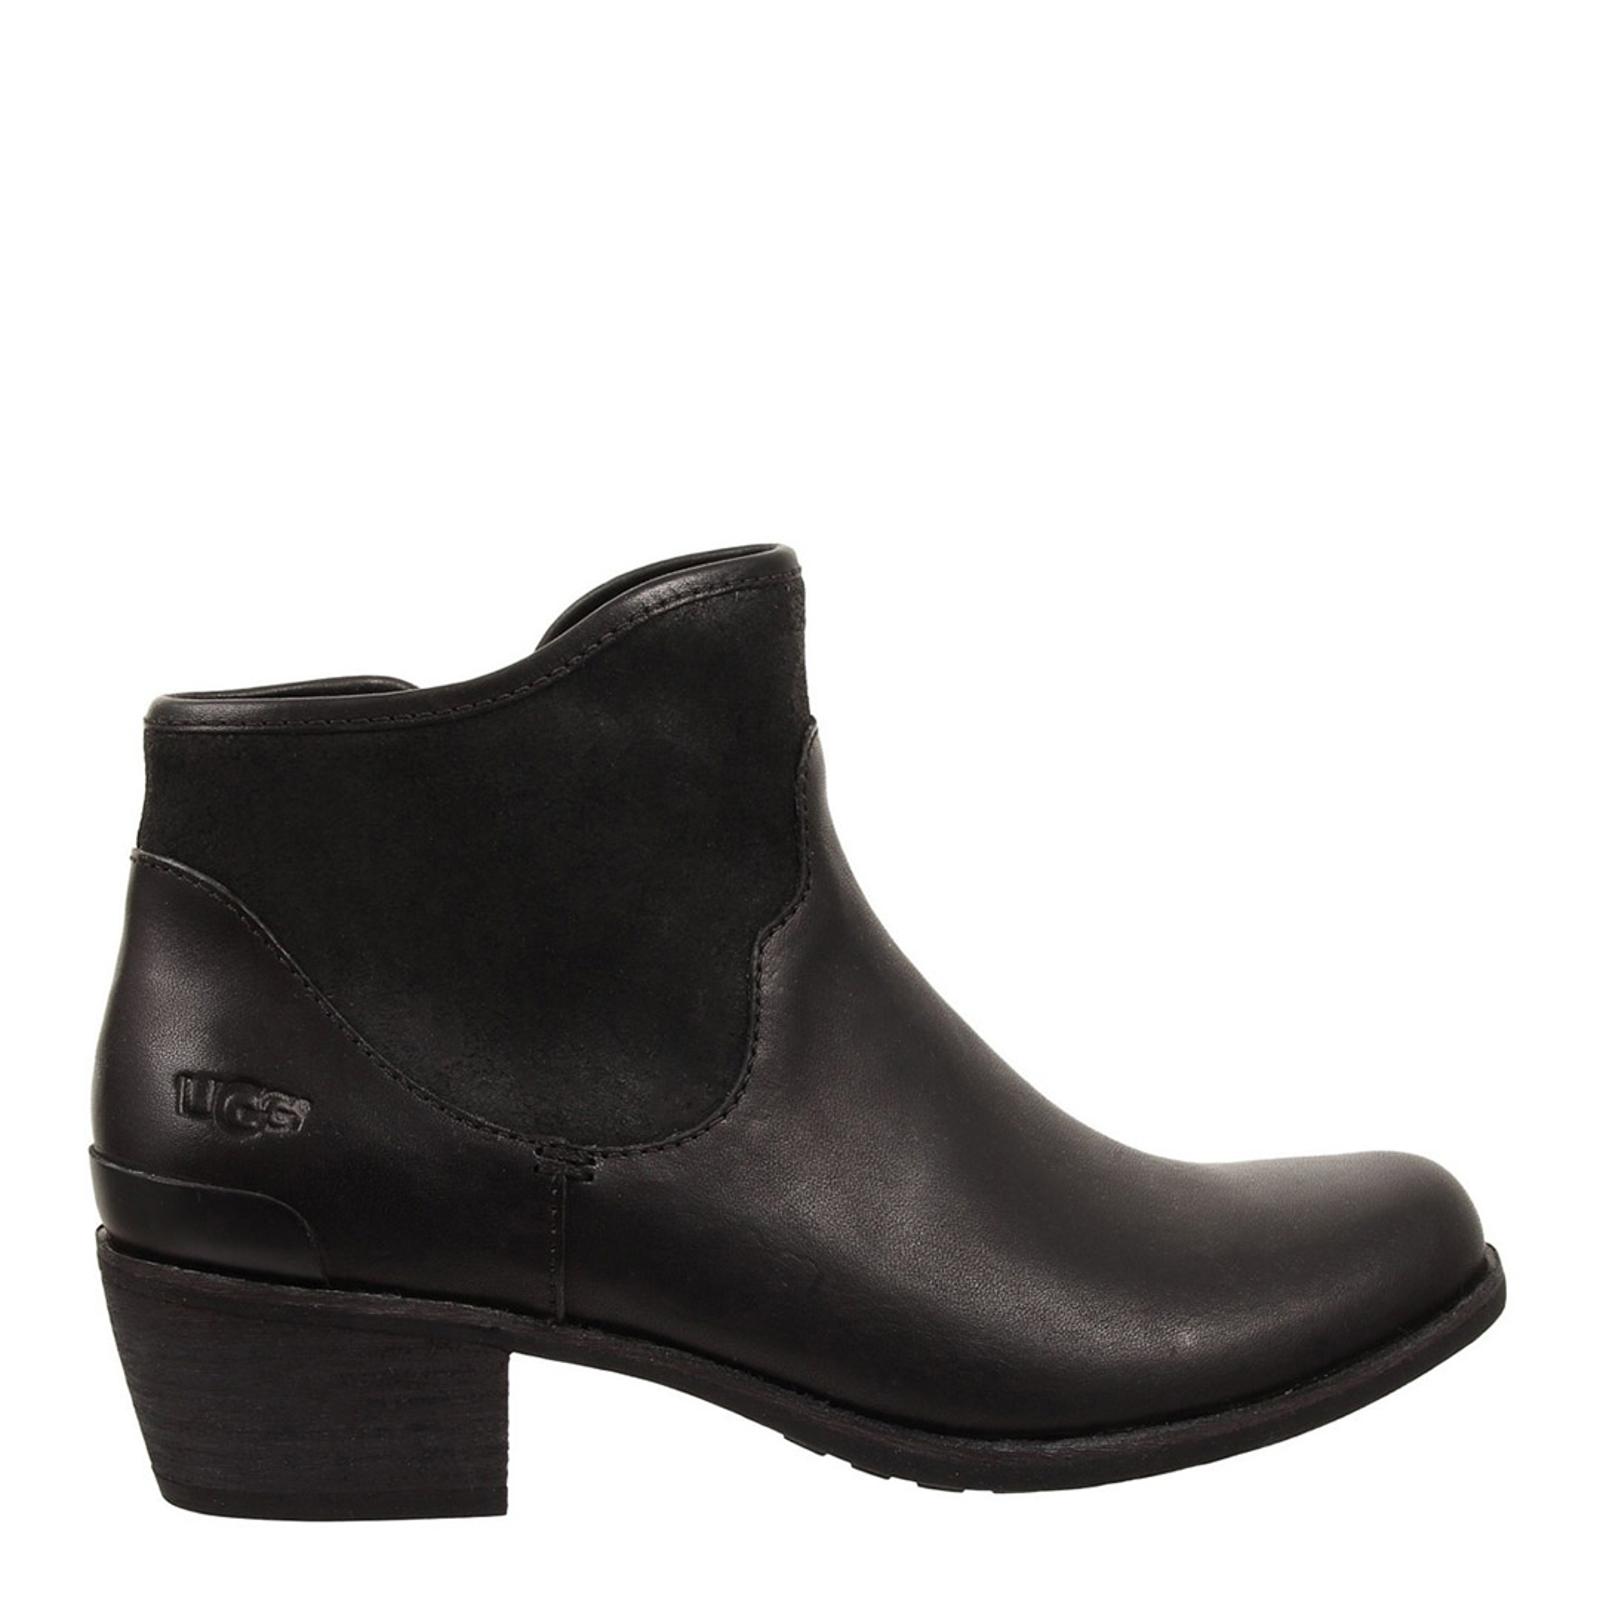 Black Leather Penelope Flat Ankle Boots - BrandAlley